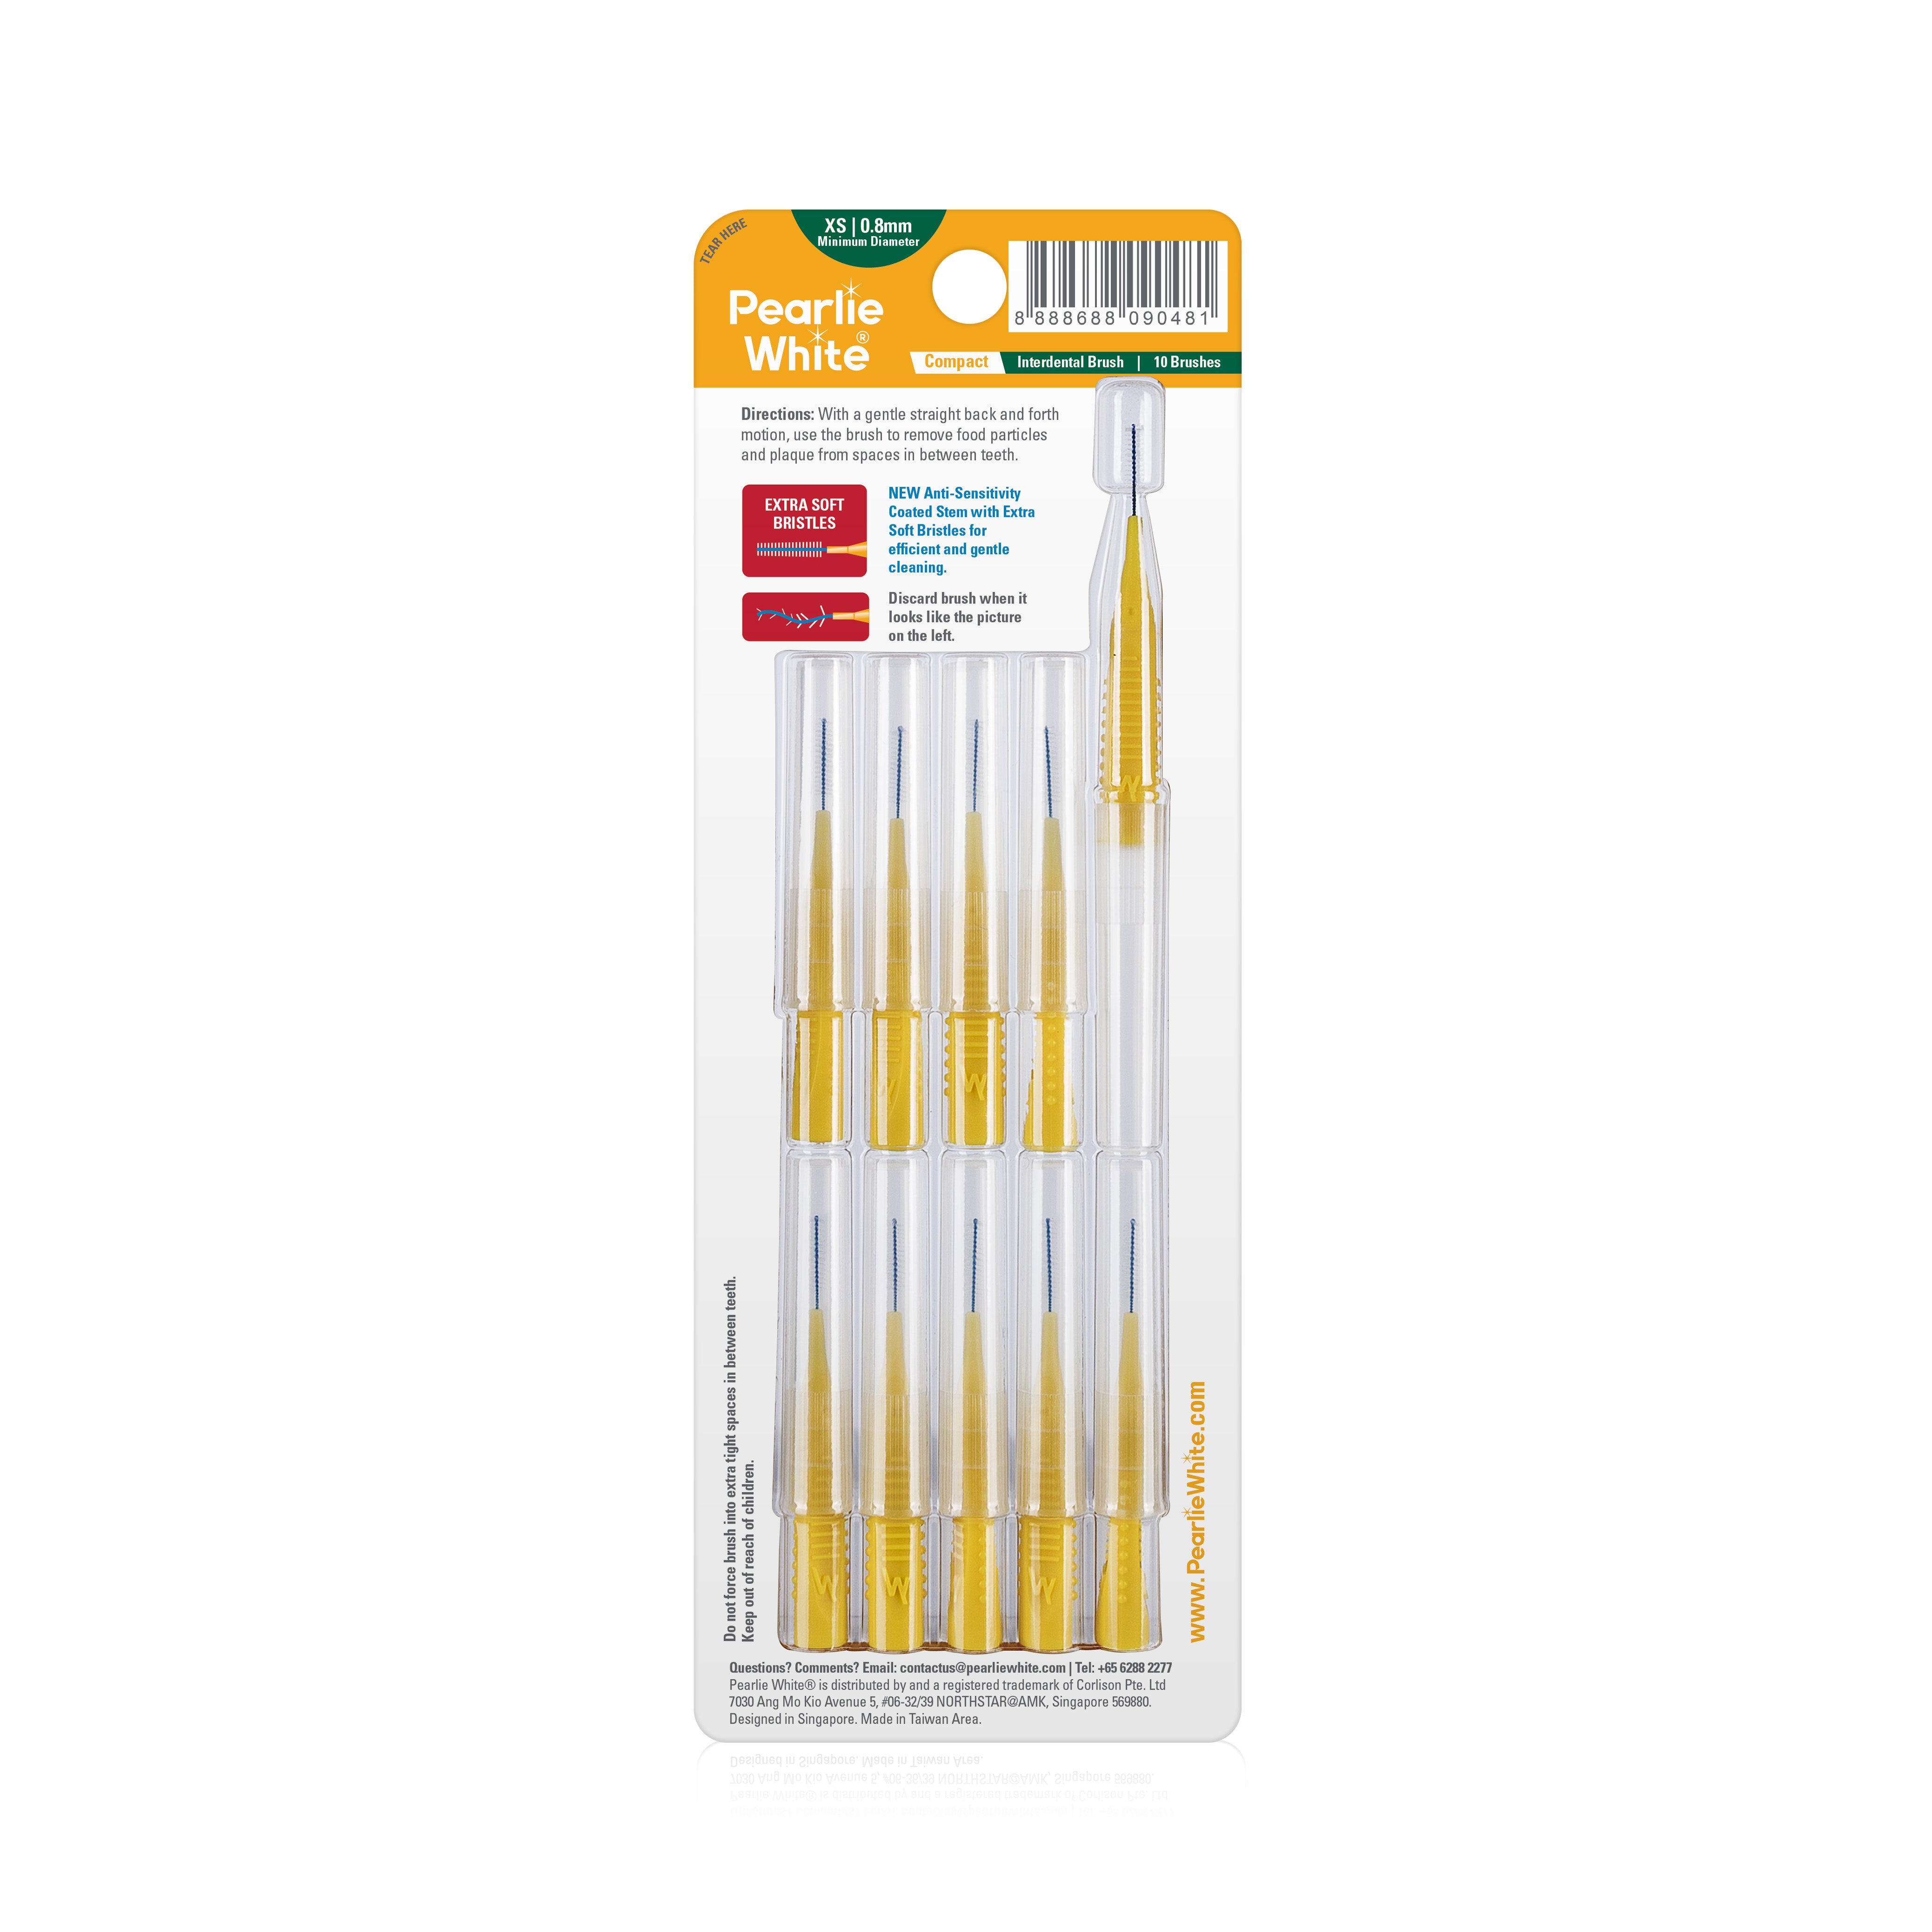 Compact Interdental Brushes - Pack of 10s